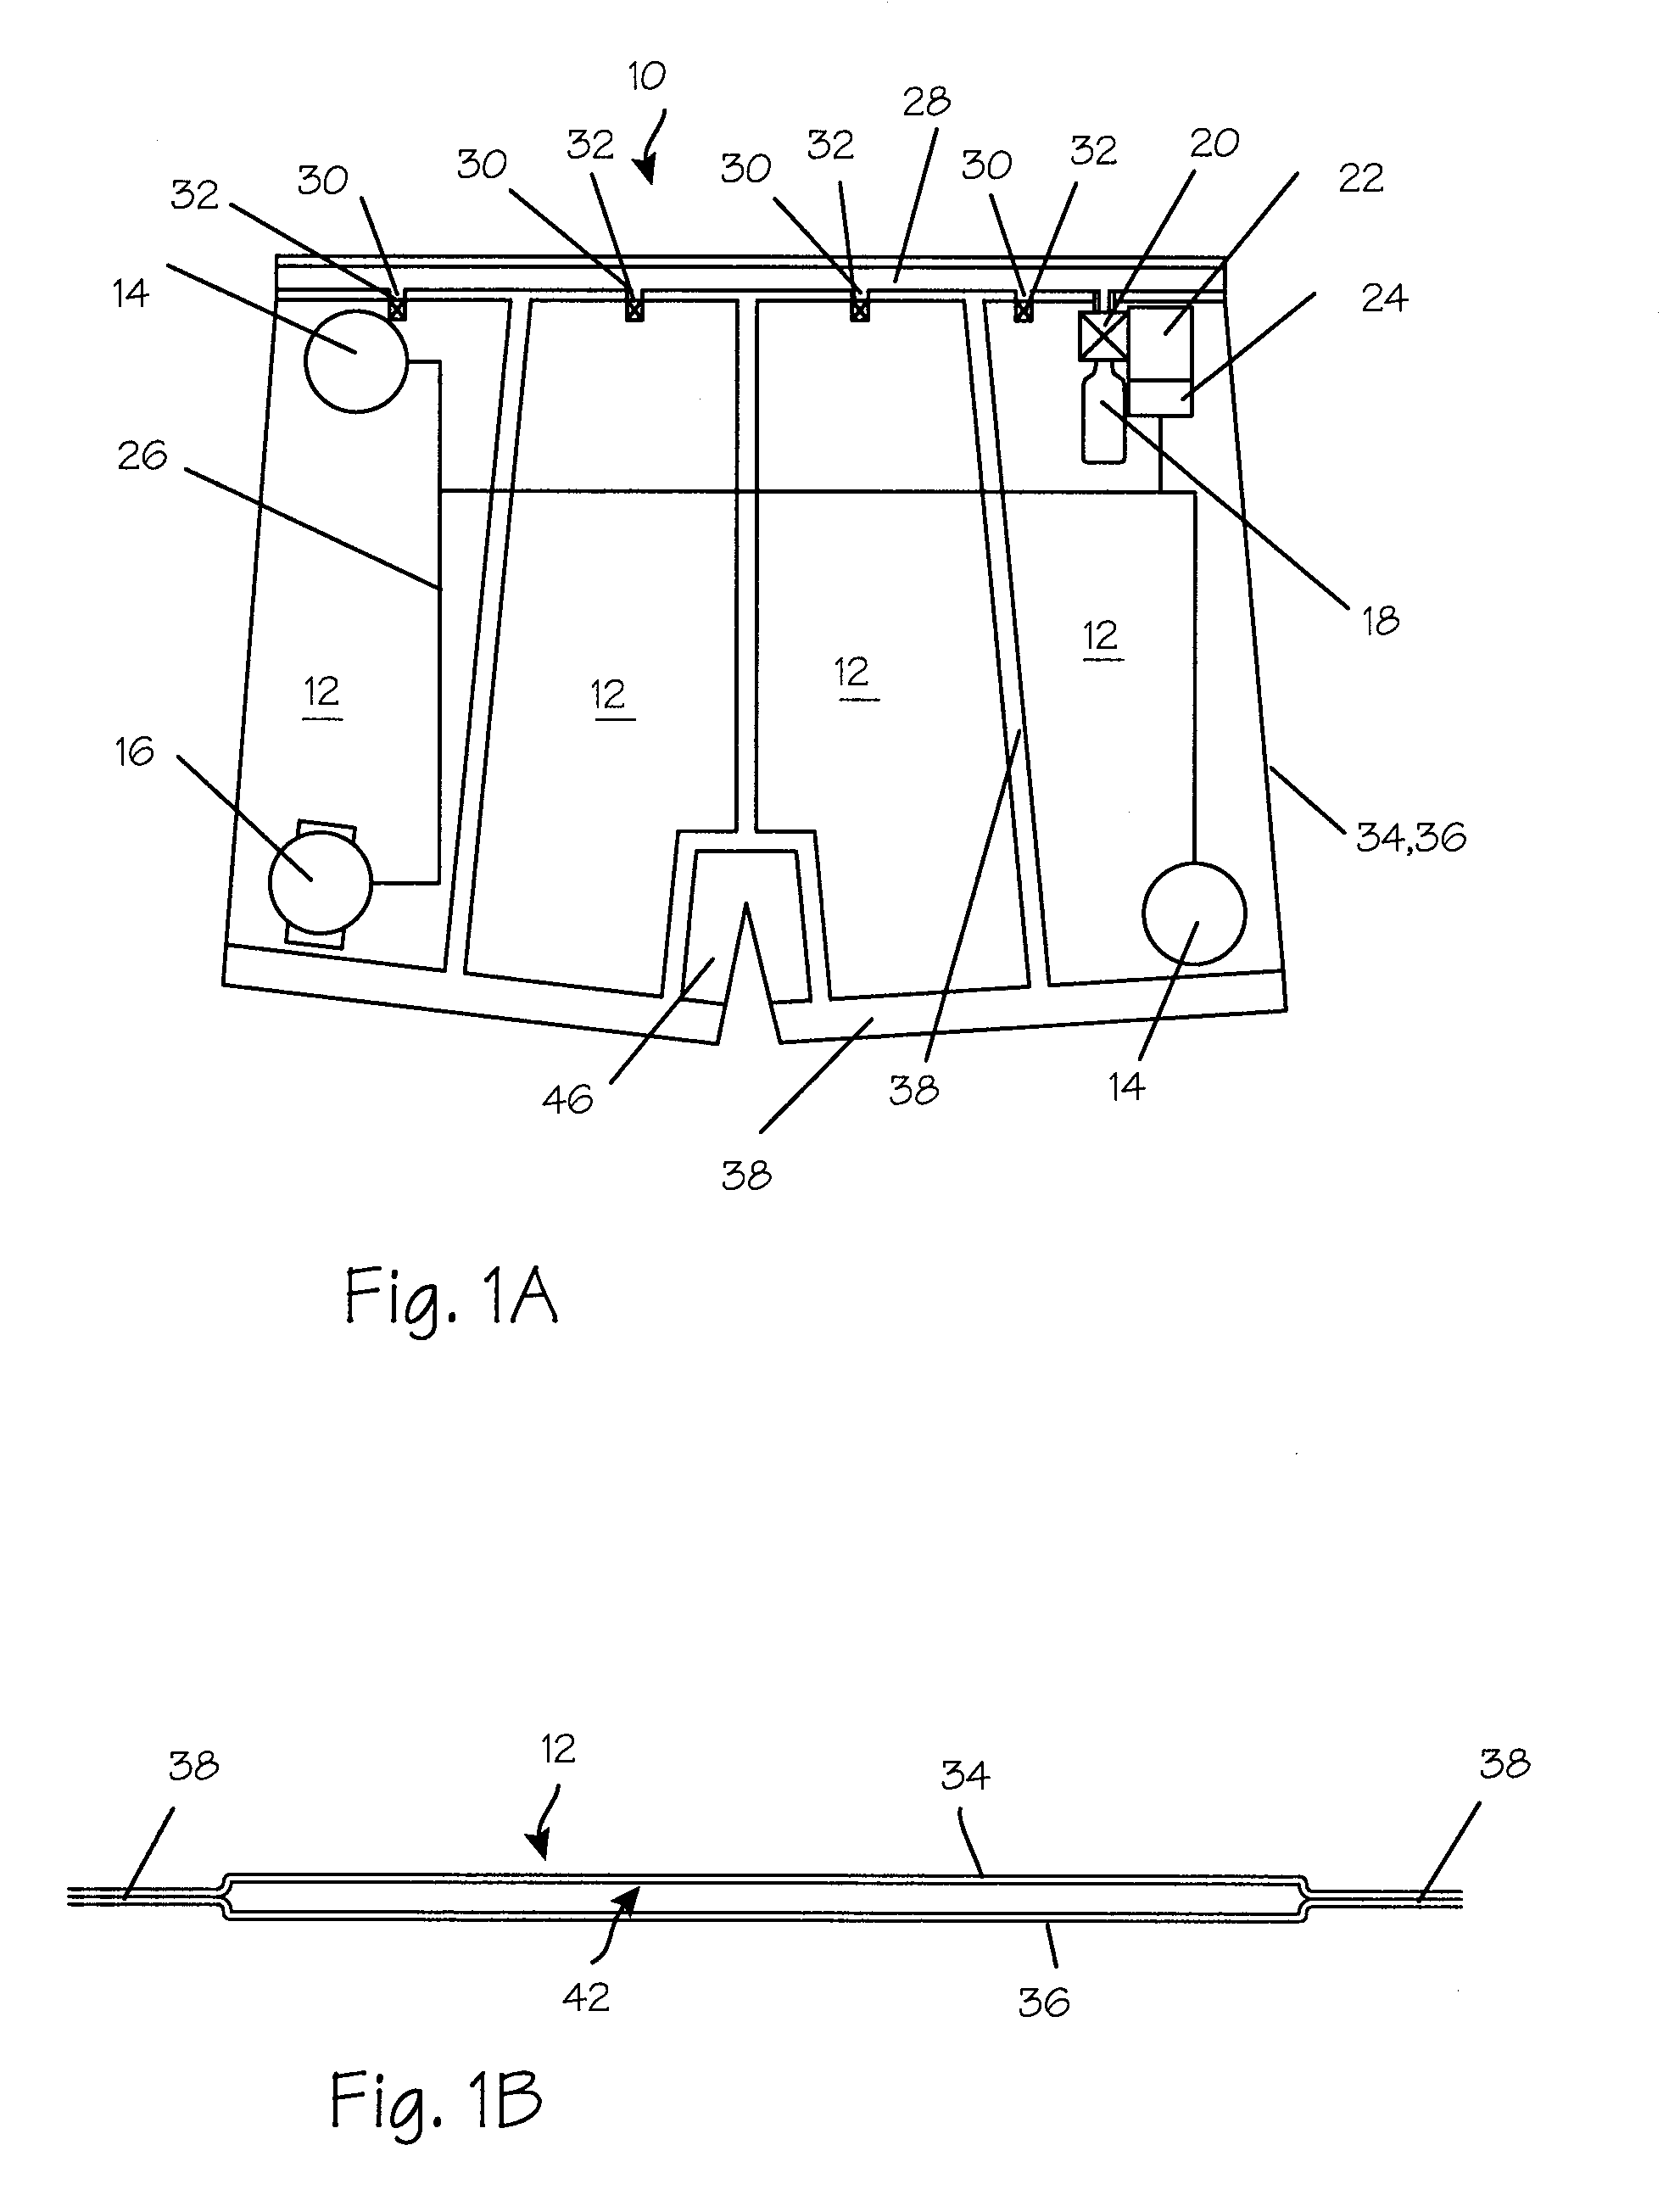 Method and Apparatus for Body Impact Protection